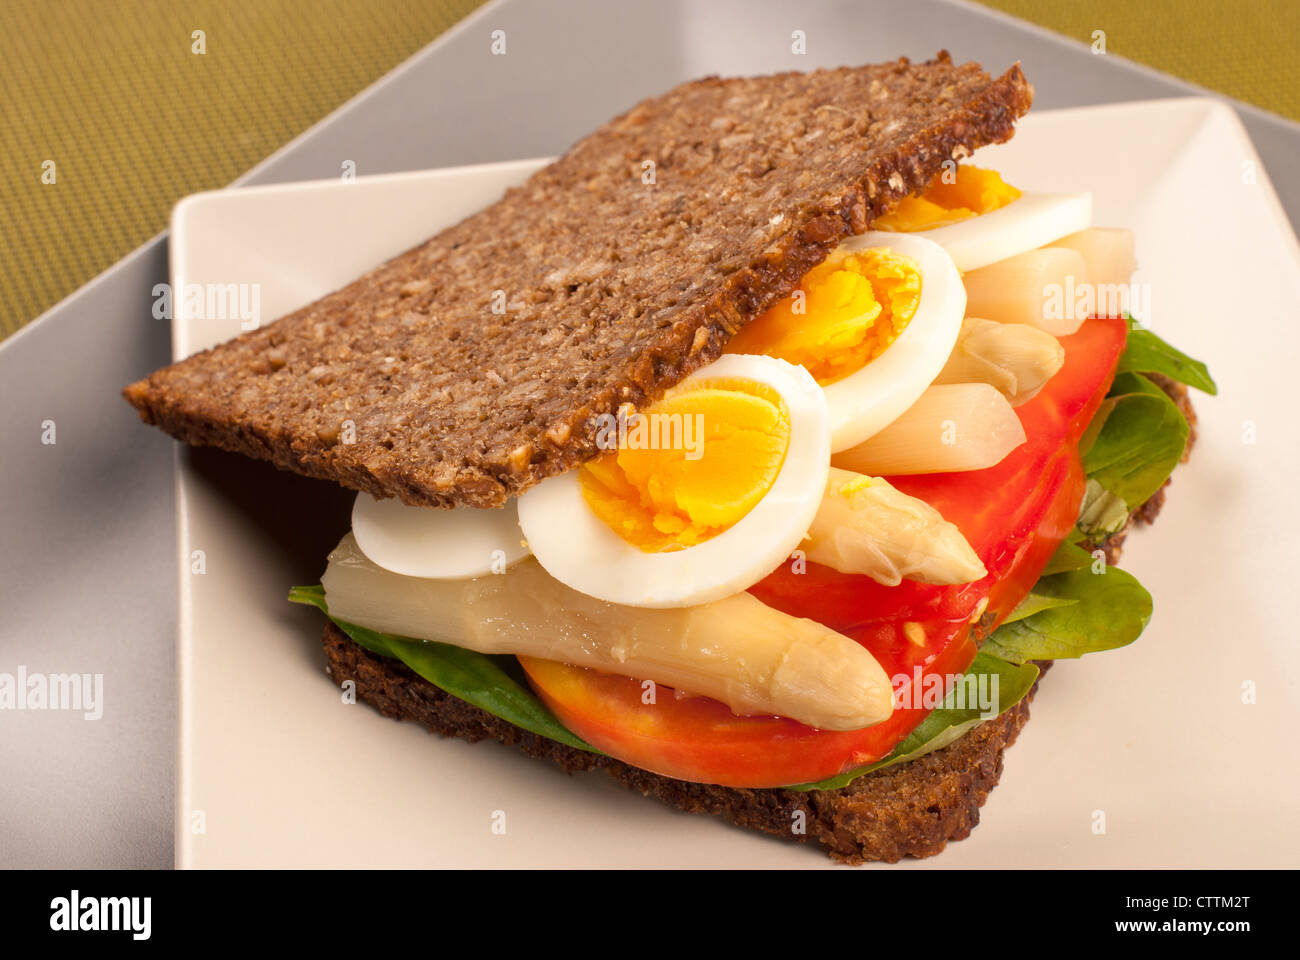 Pumpernickel style rye bread with a healthy vegetarian fillling Stock Photo